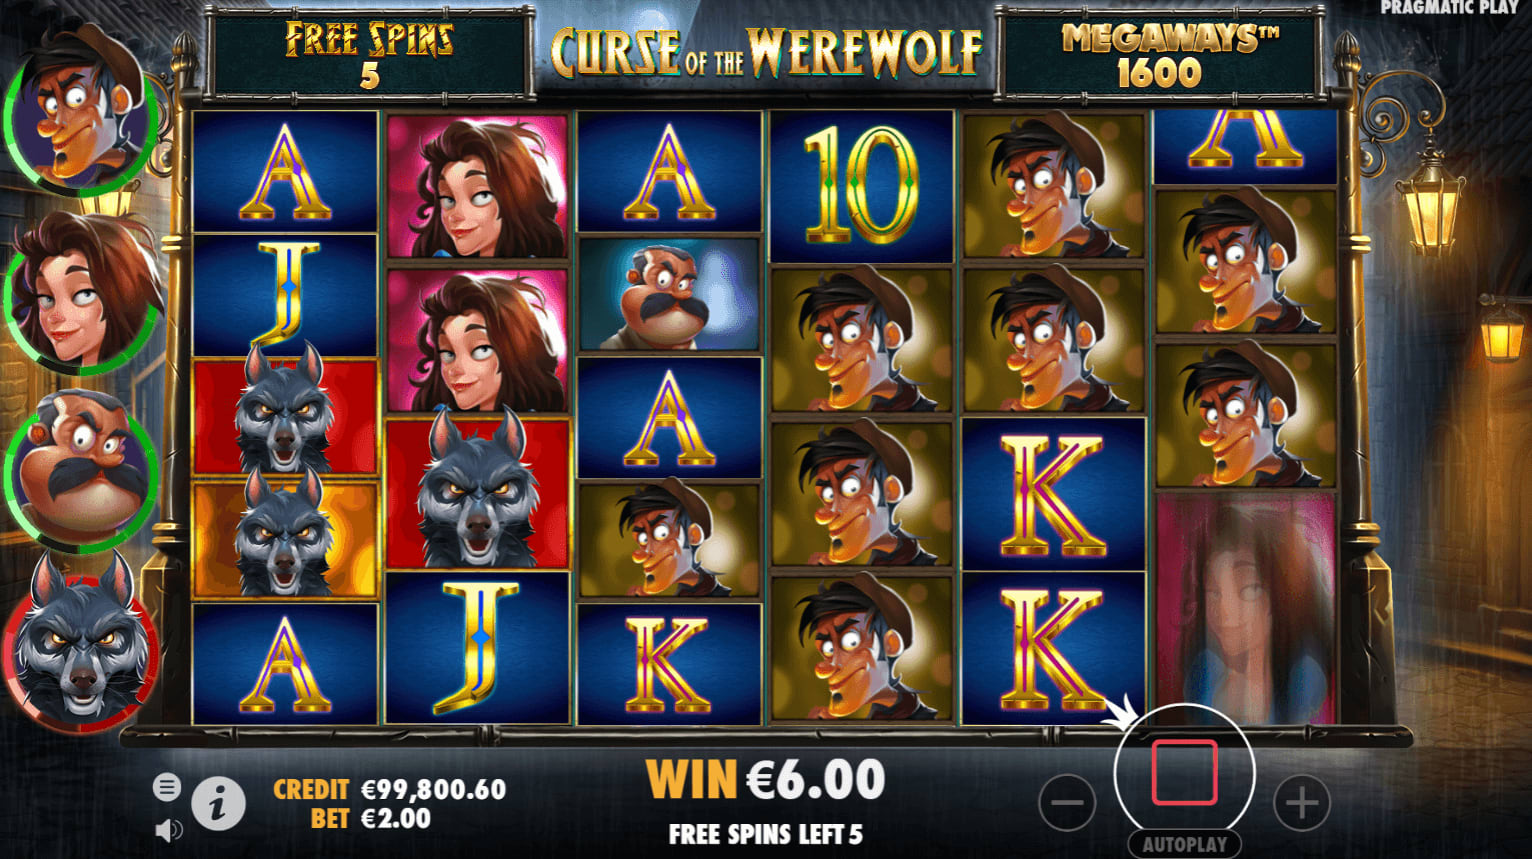 Curse of the Werewolf Megaways slot apk download for android  1.0.0 screenshot 2